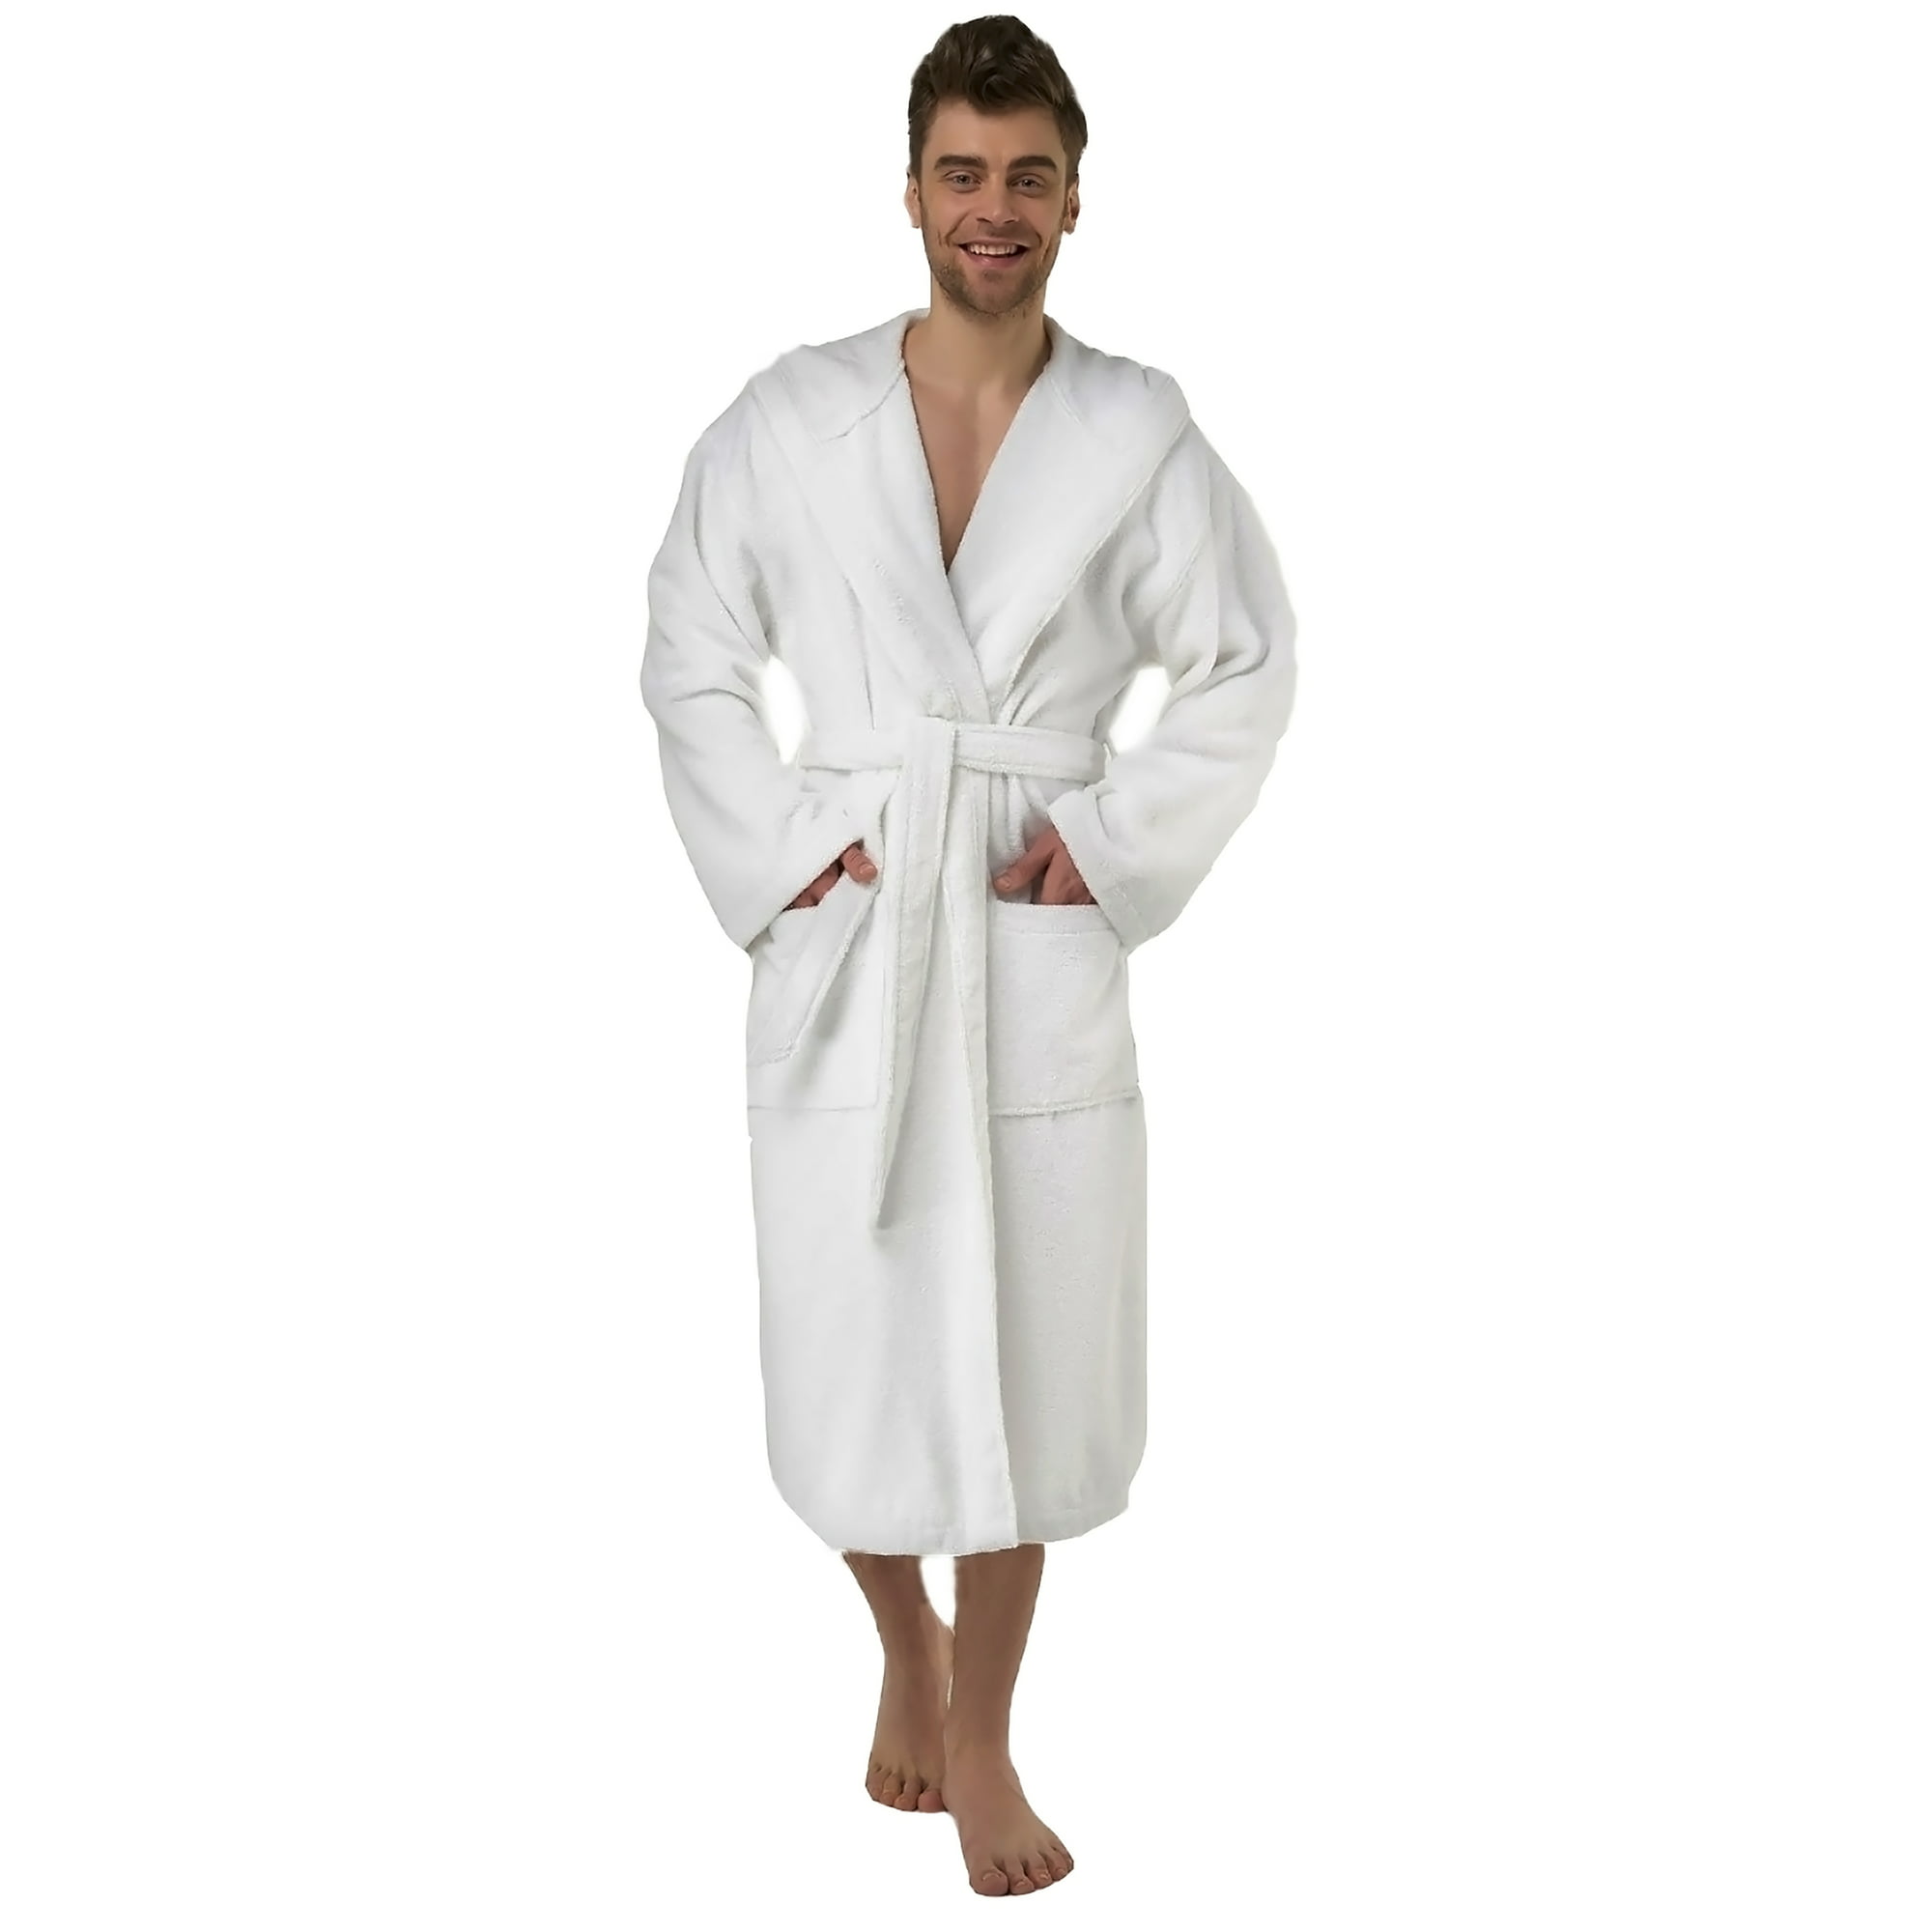 Spa & Resort Sales Mens White Hooded Robe for Men, 50 inch Length, Fist most Medium, Large and XL Sizes. 